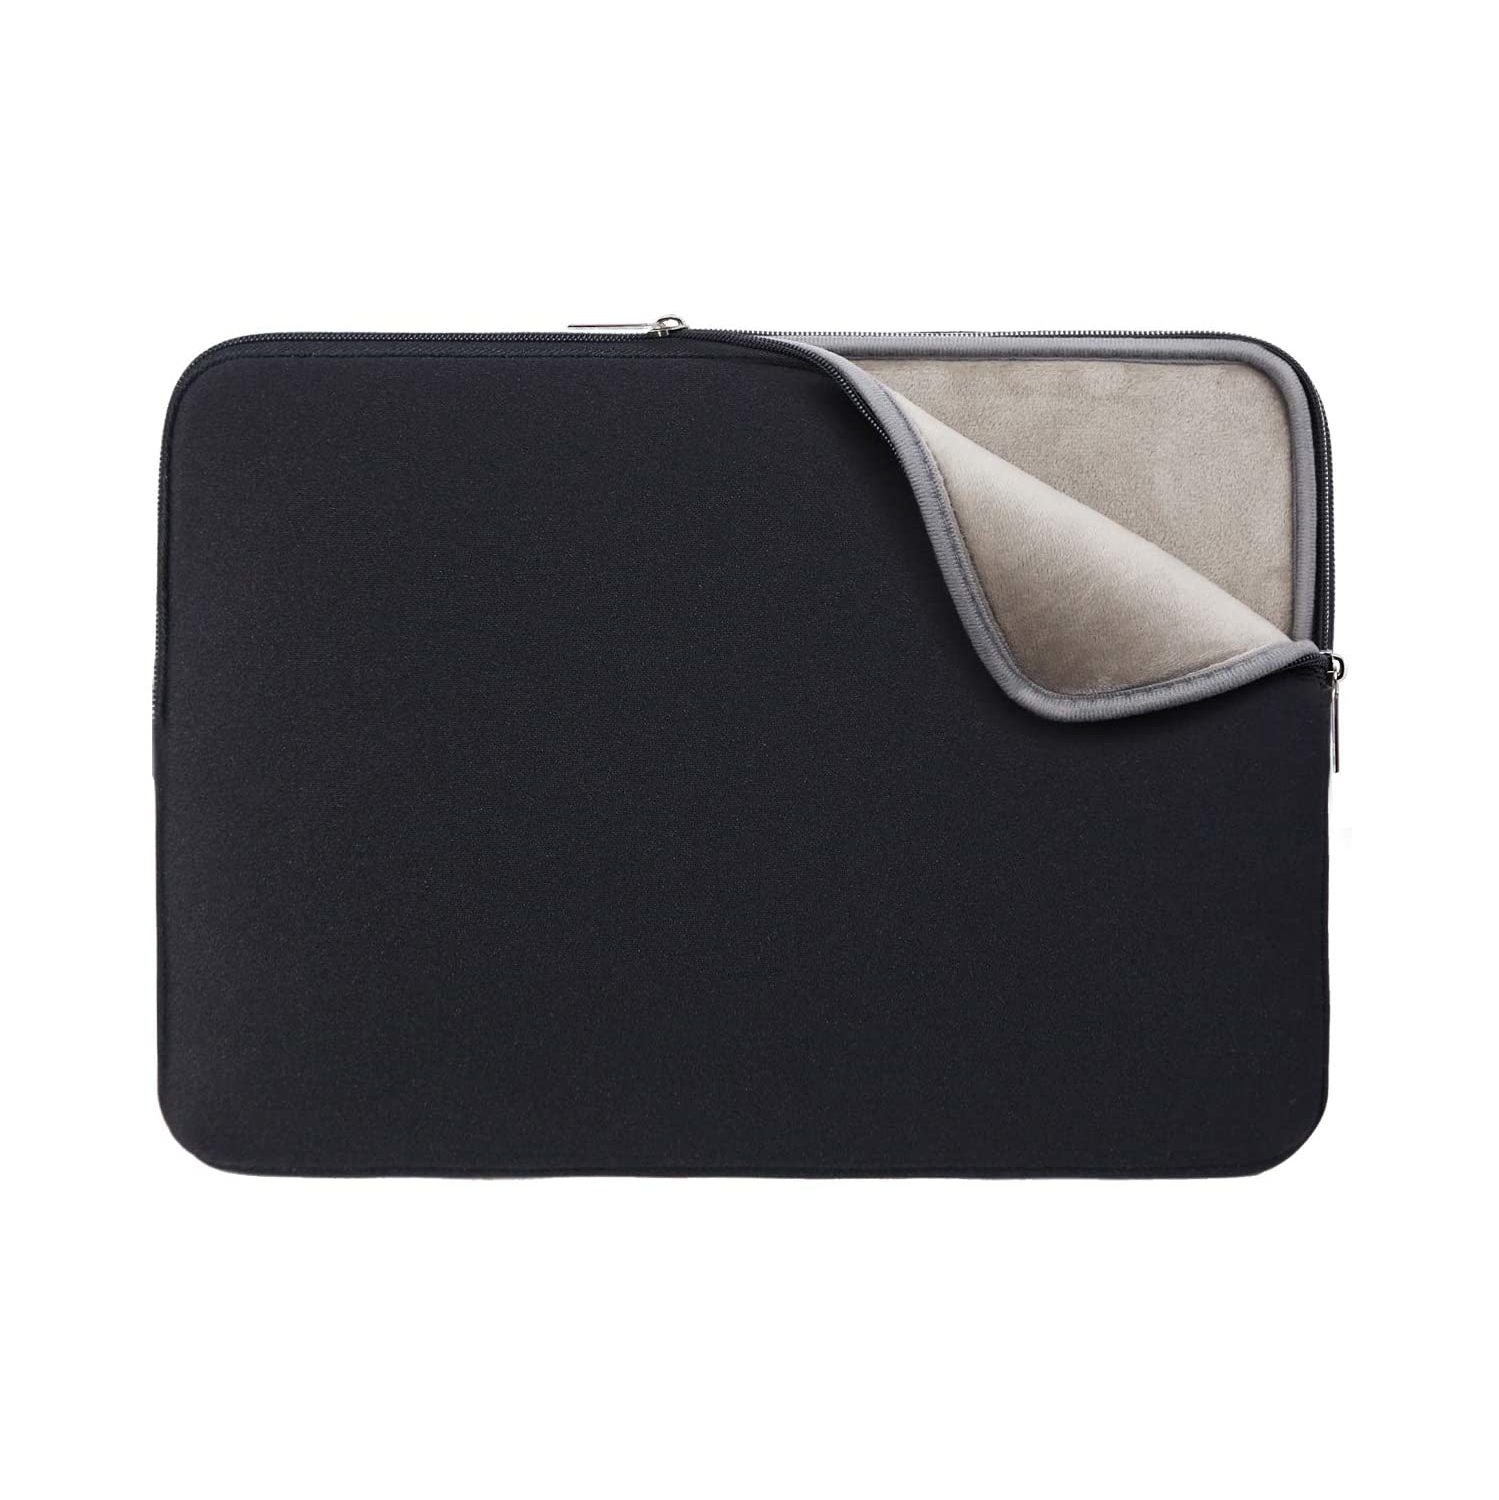 11 Inch Laptop Sleeve Soft Fluffy Lining Case Cover Bag Compatible with 11.6" MacBook Air for 11.6 Dell HP